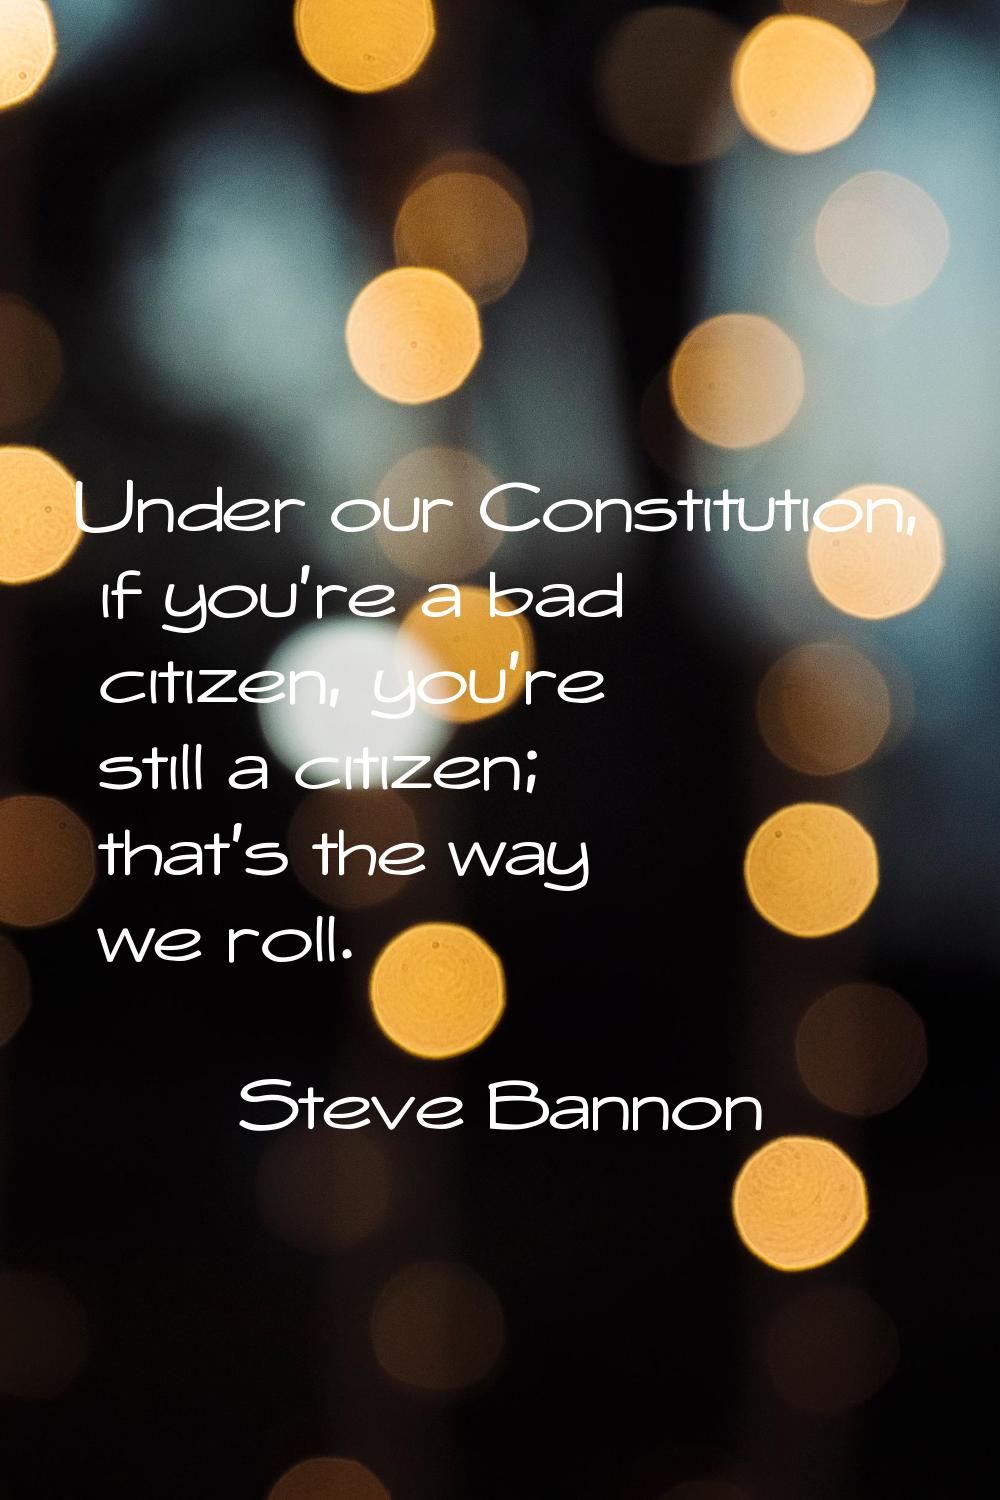 Under our Constitution, if you're a bad citizen, you're still a citizen; that's the way we roll.